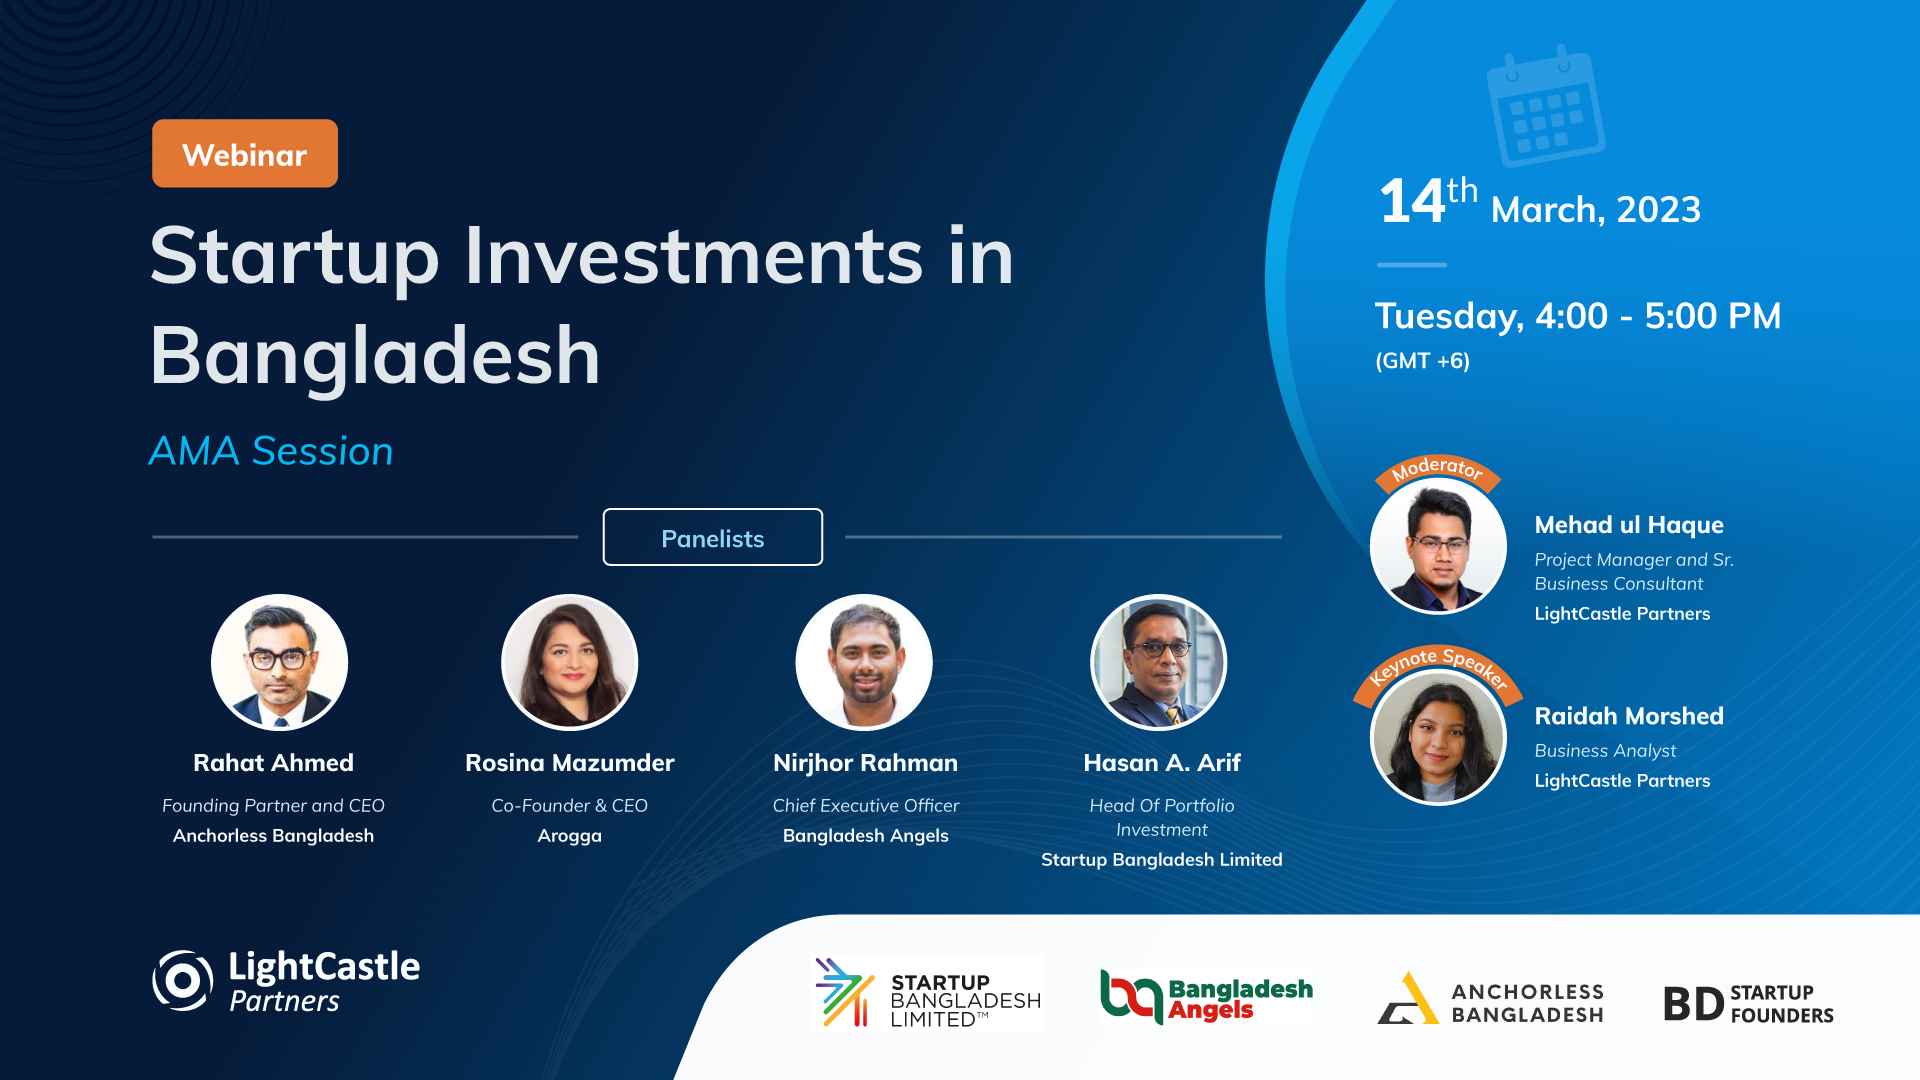 Key Highlights from the Webinar on Startup Investments in Bangladesh